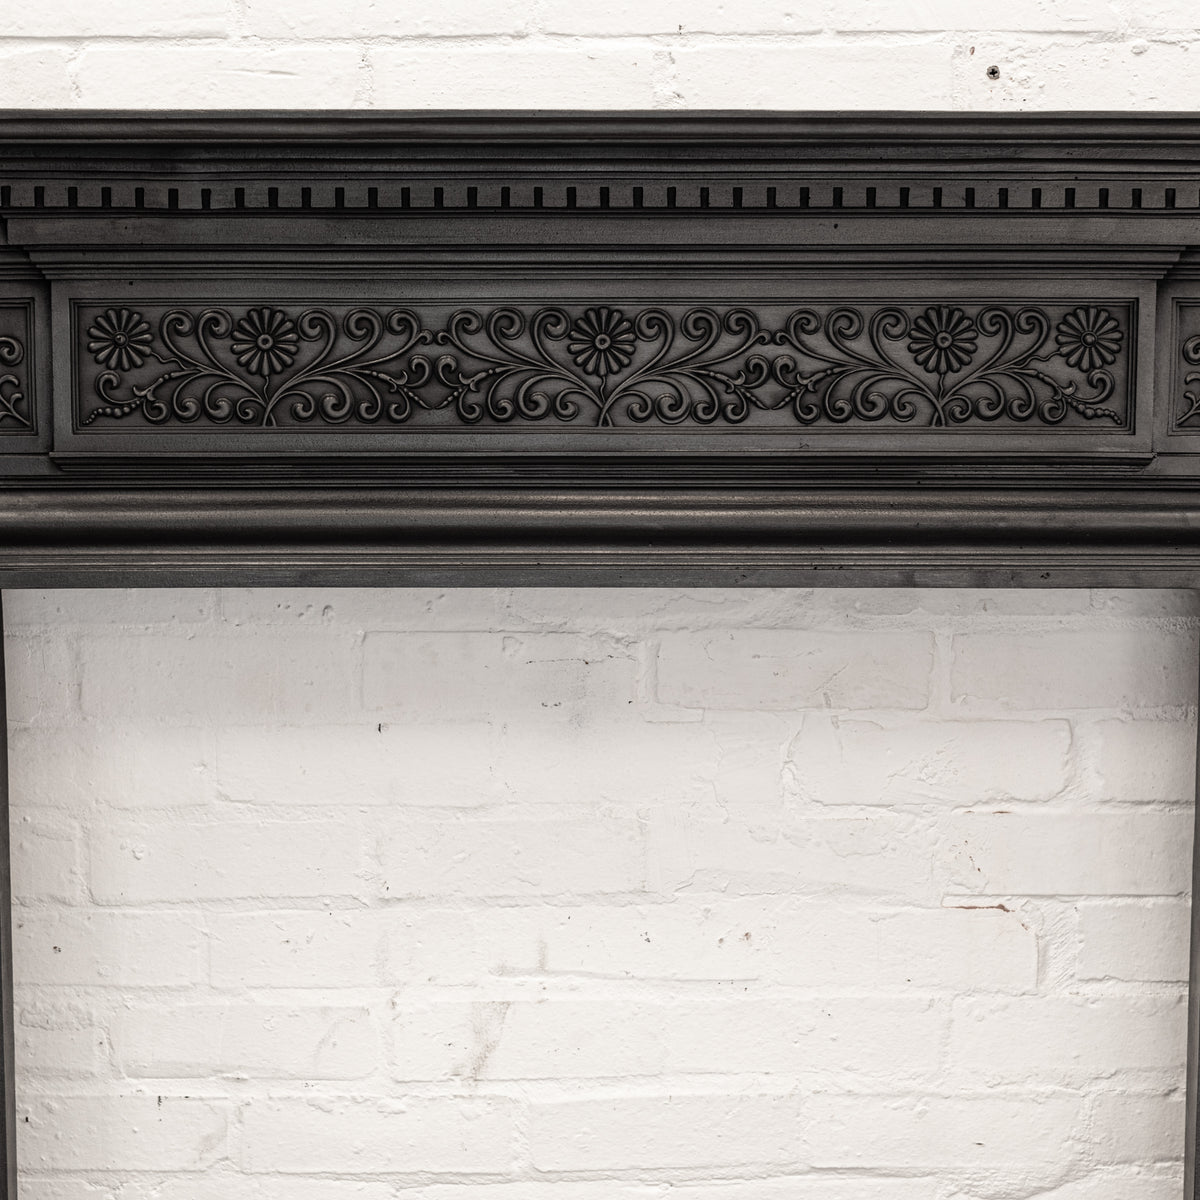 Antique Coalbrookdale Cast Iron Fireplace Surround | The Architectural Forum